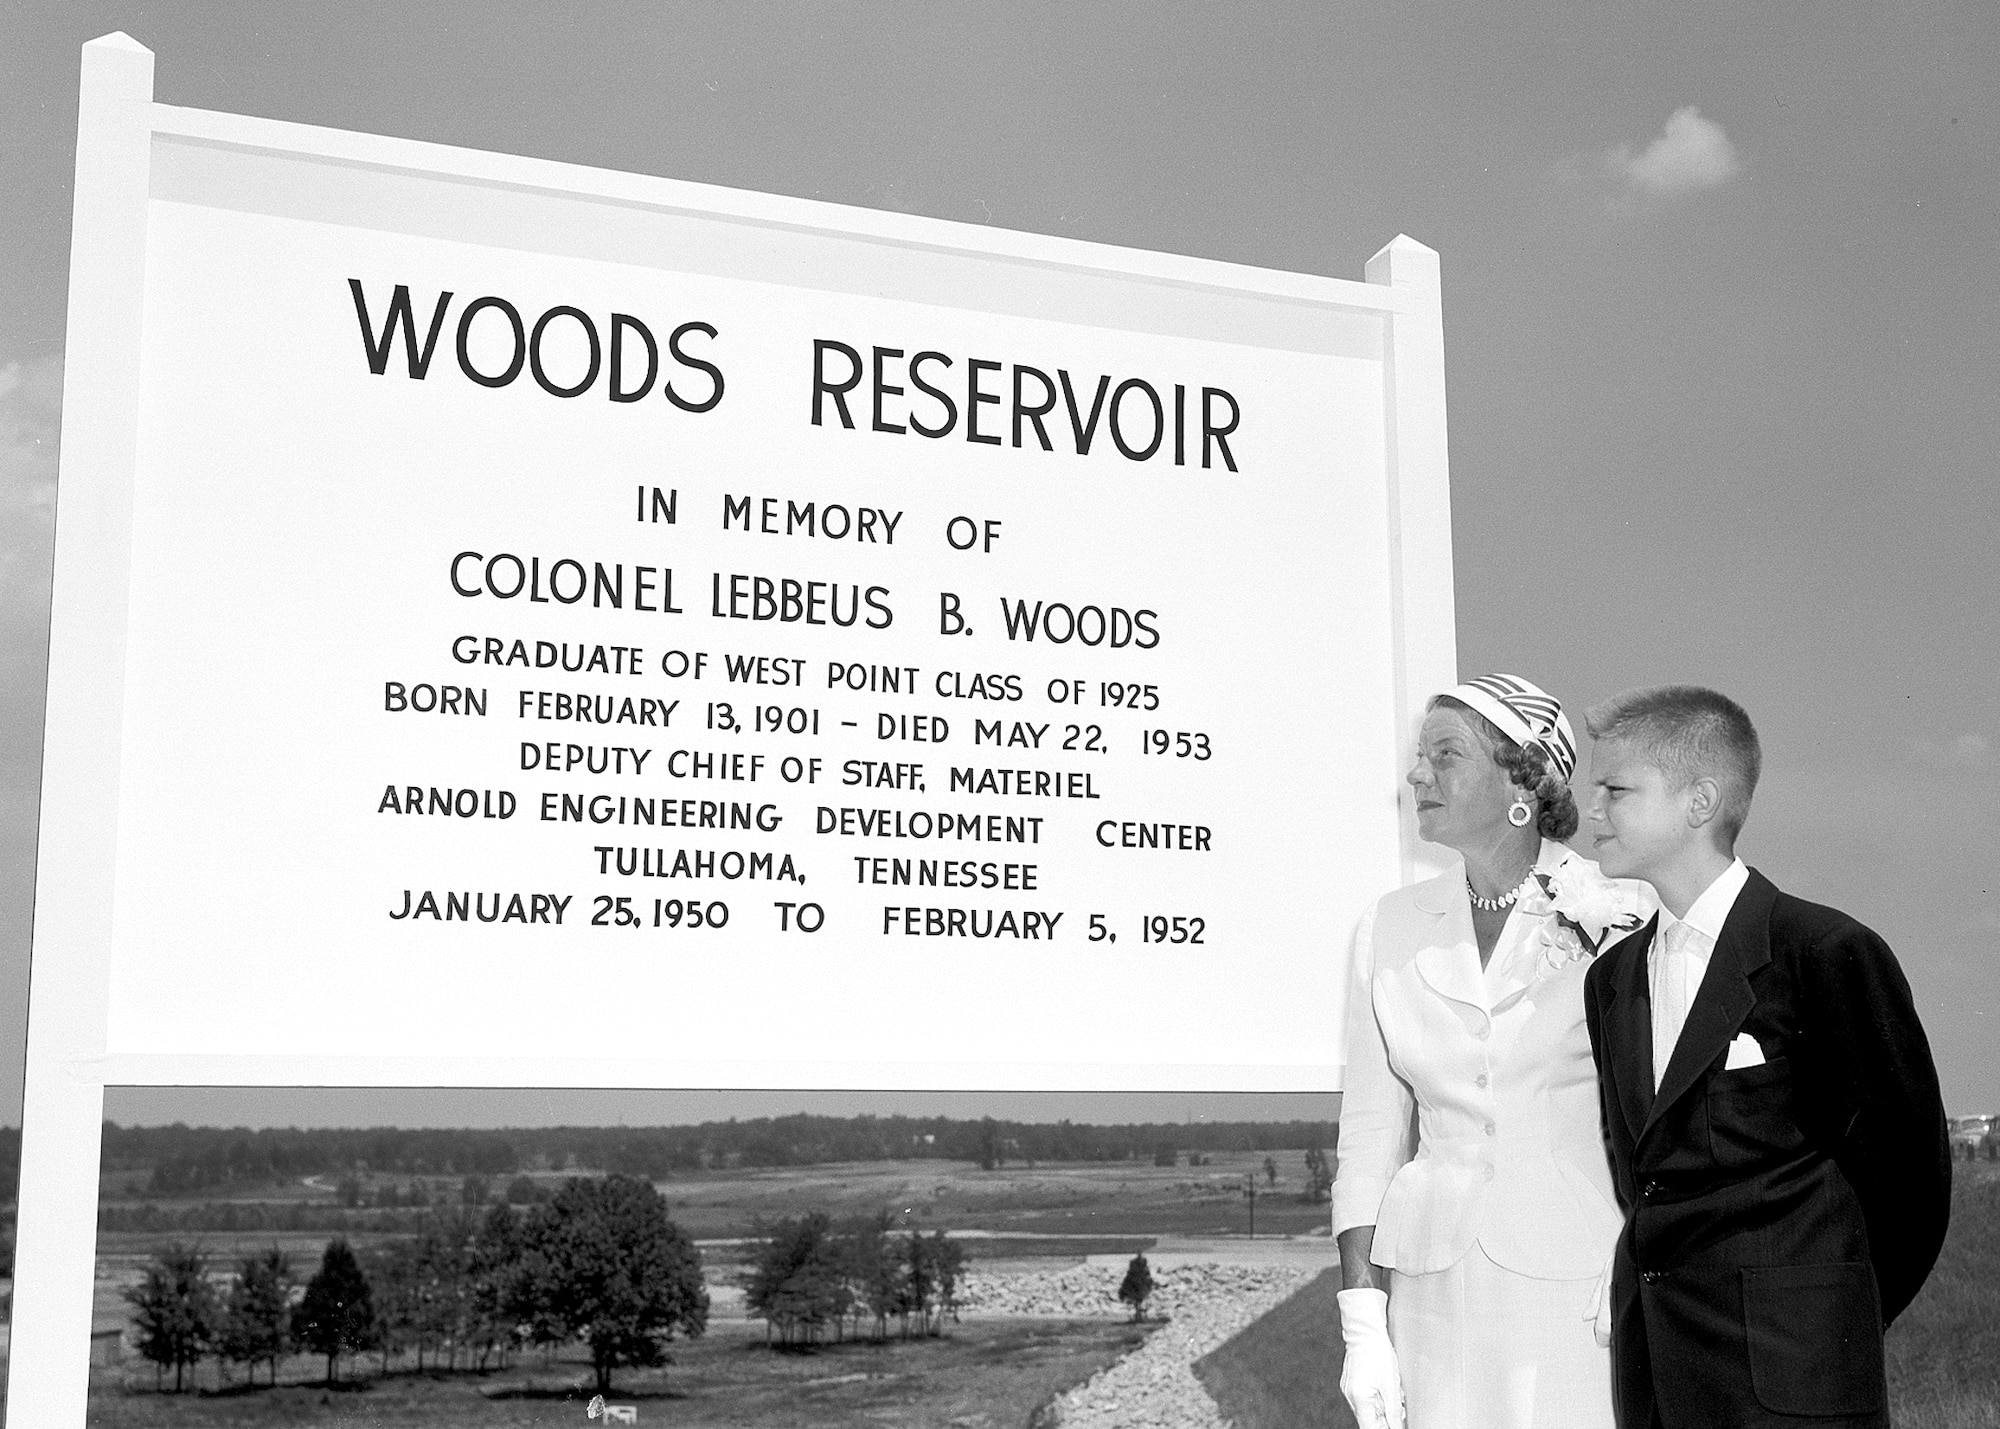 The reservoir created by the construction of the Elk River Dam was dedicated in the memory of Col. Lebbeus Woods in 1953. Pictured at the dedication ceremony are Woods’ wife Dorothy and son. Woods was one of the first two Air Force officers to arrive at AEDC for the center project. He served at AEDC until February 1952, when he was given one of the top posts within the then-active Air Materiel Command. The Elk River Dam was completed 70 years ago this month. Its construction led to the creation of Woods Reservoir, which has since supplied cooling water to the test facilities at Arnold Air Force Base, Tennessee. Arnold AFB is the headquarters of the Arnold Engineering Development Complex. (U.S. Air Force photo)